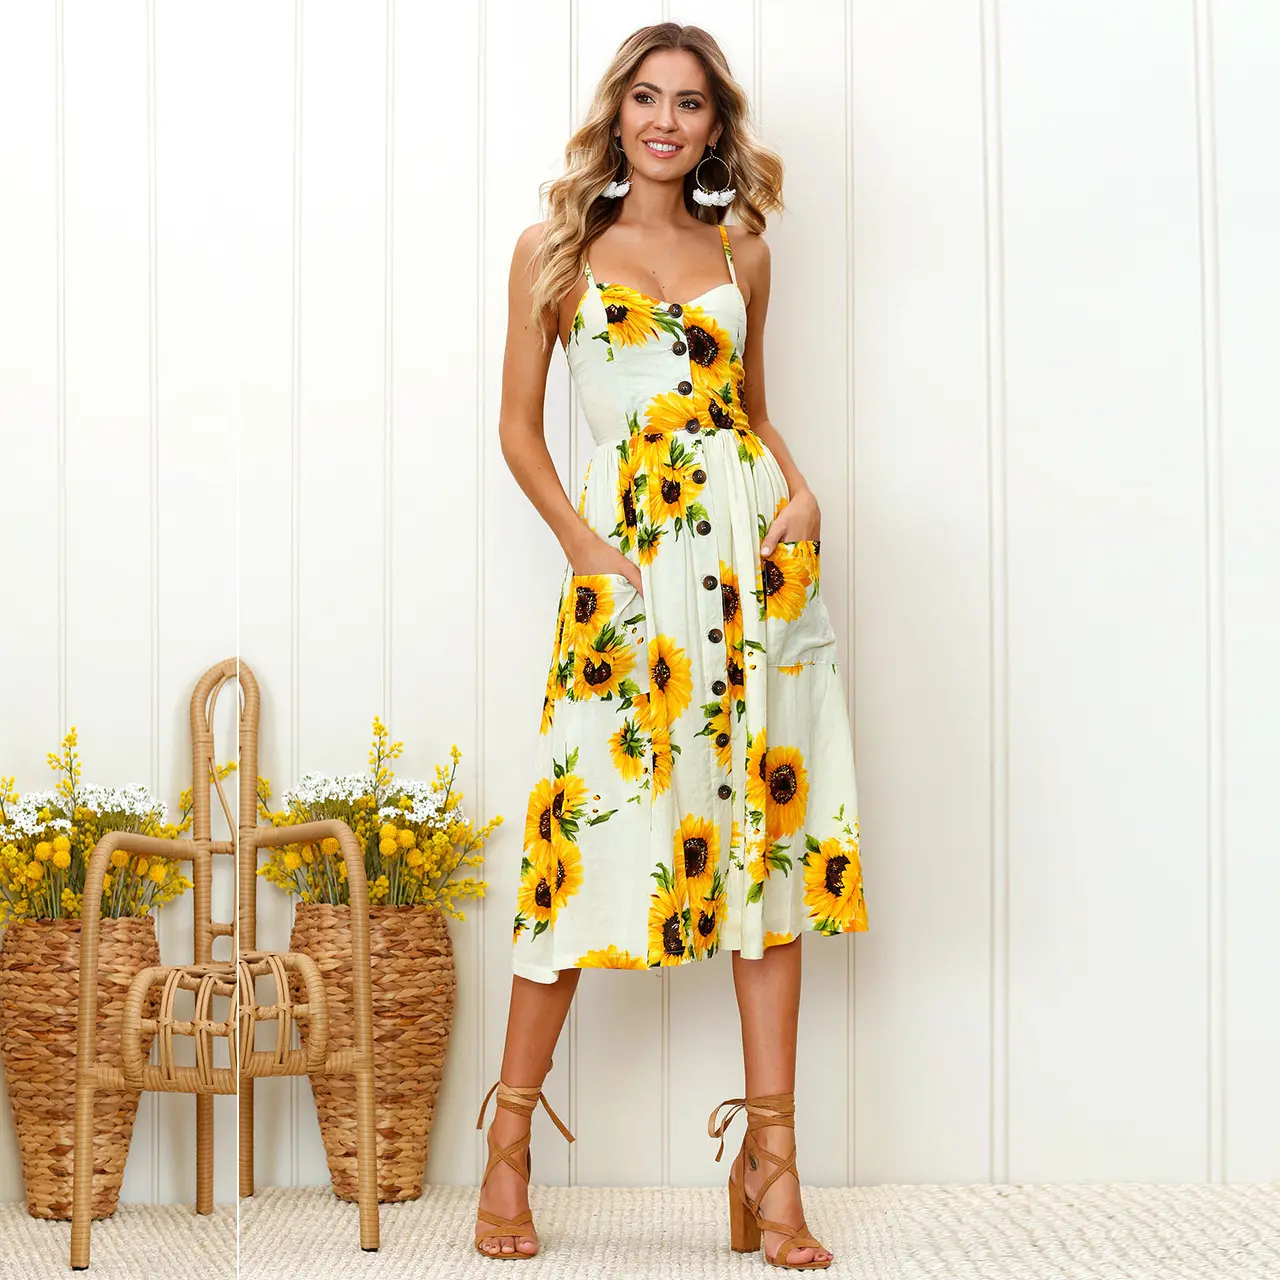 2021 women dress European and American spring and summer fashion pineapple pattern printed suspender halter dress